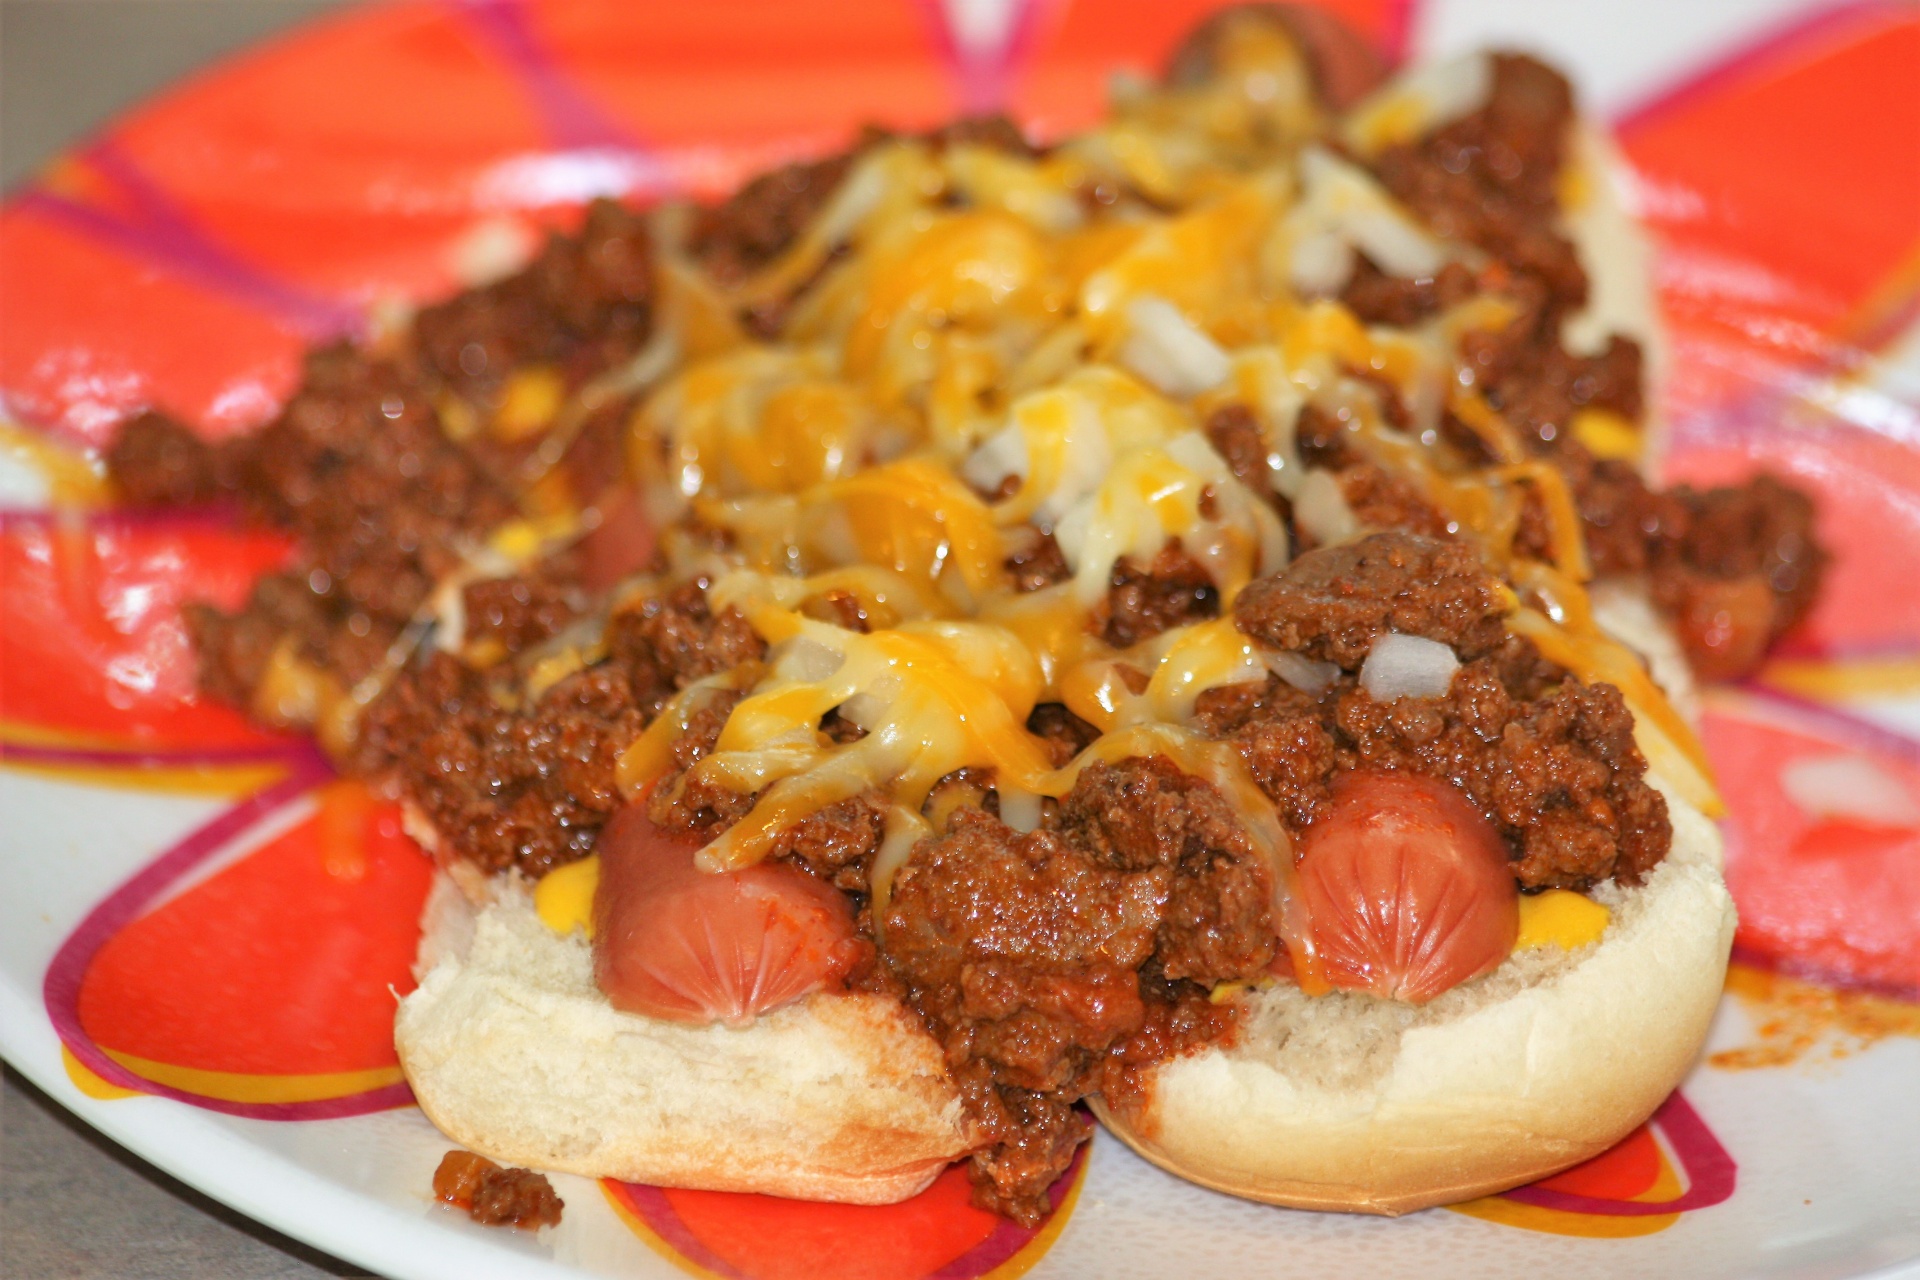 Chili Cheese Dog On Plate